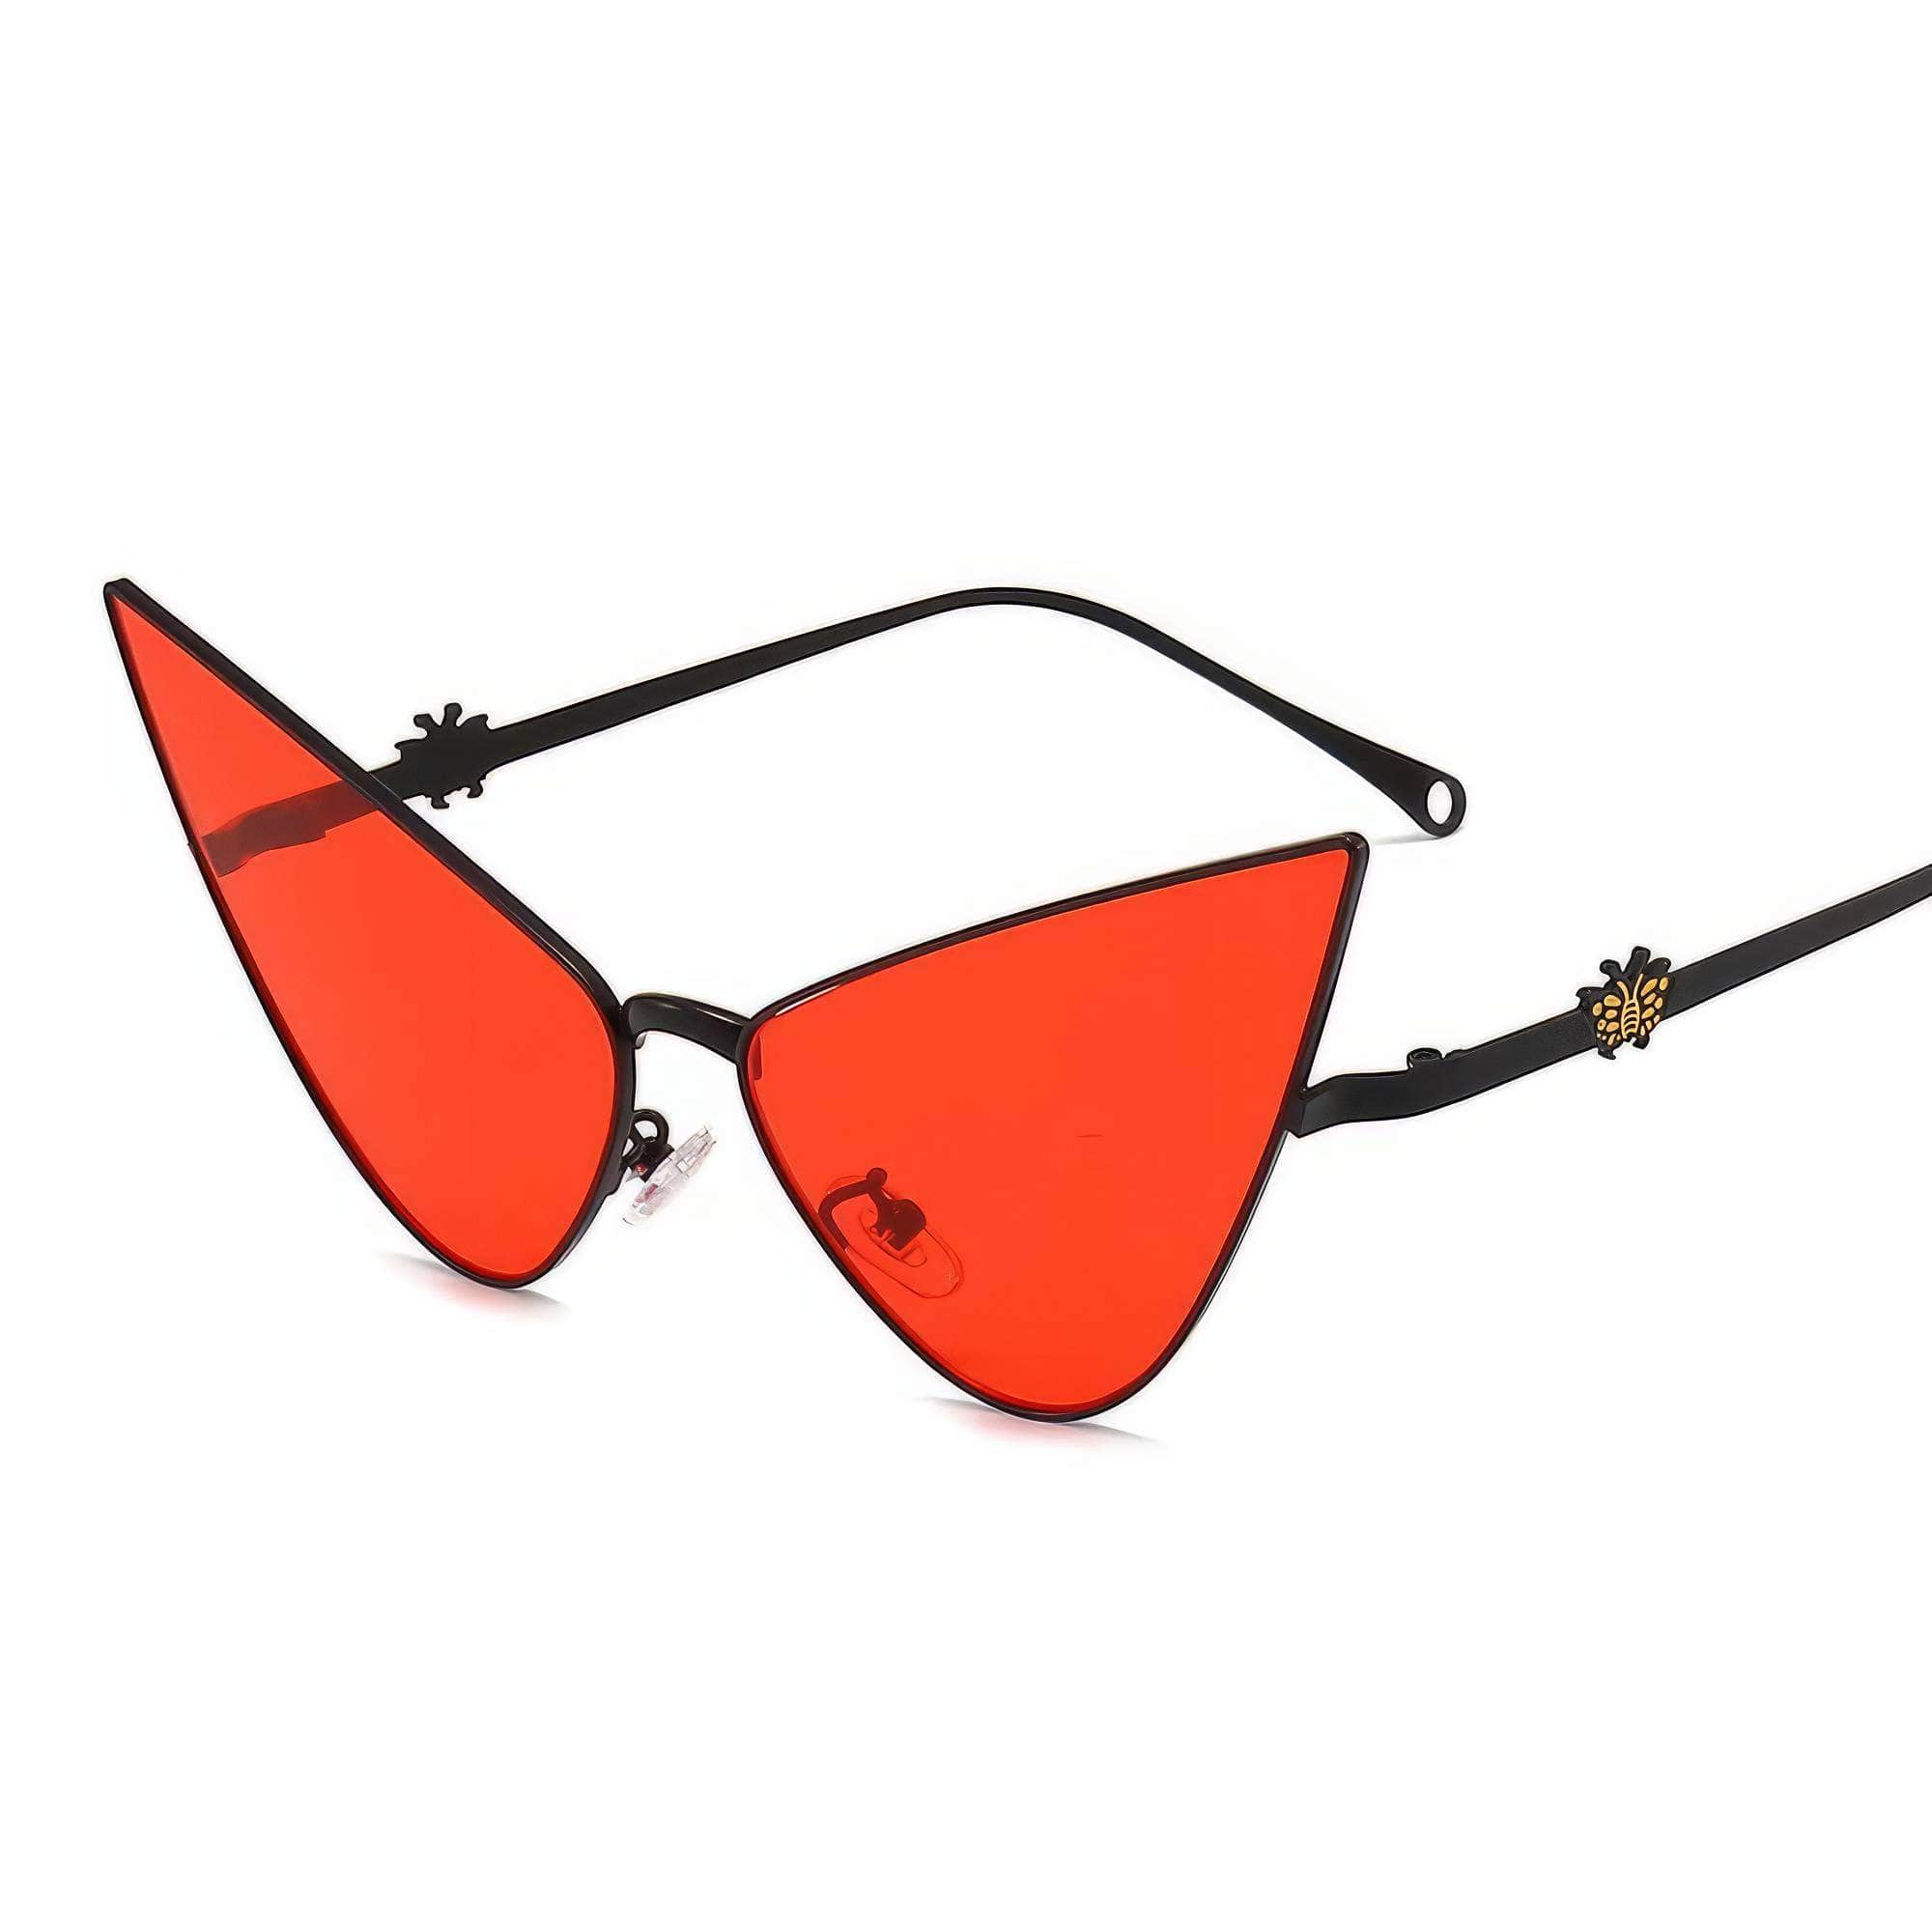 Fashion Butterfly Sunglasses Red/Black / Resin